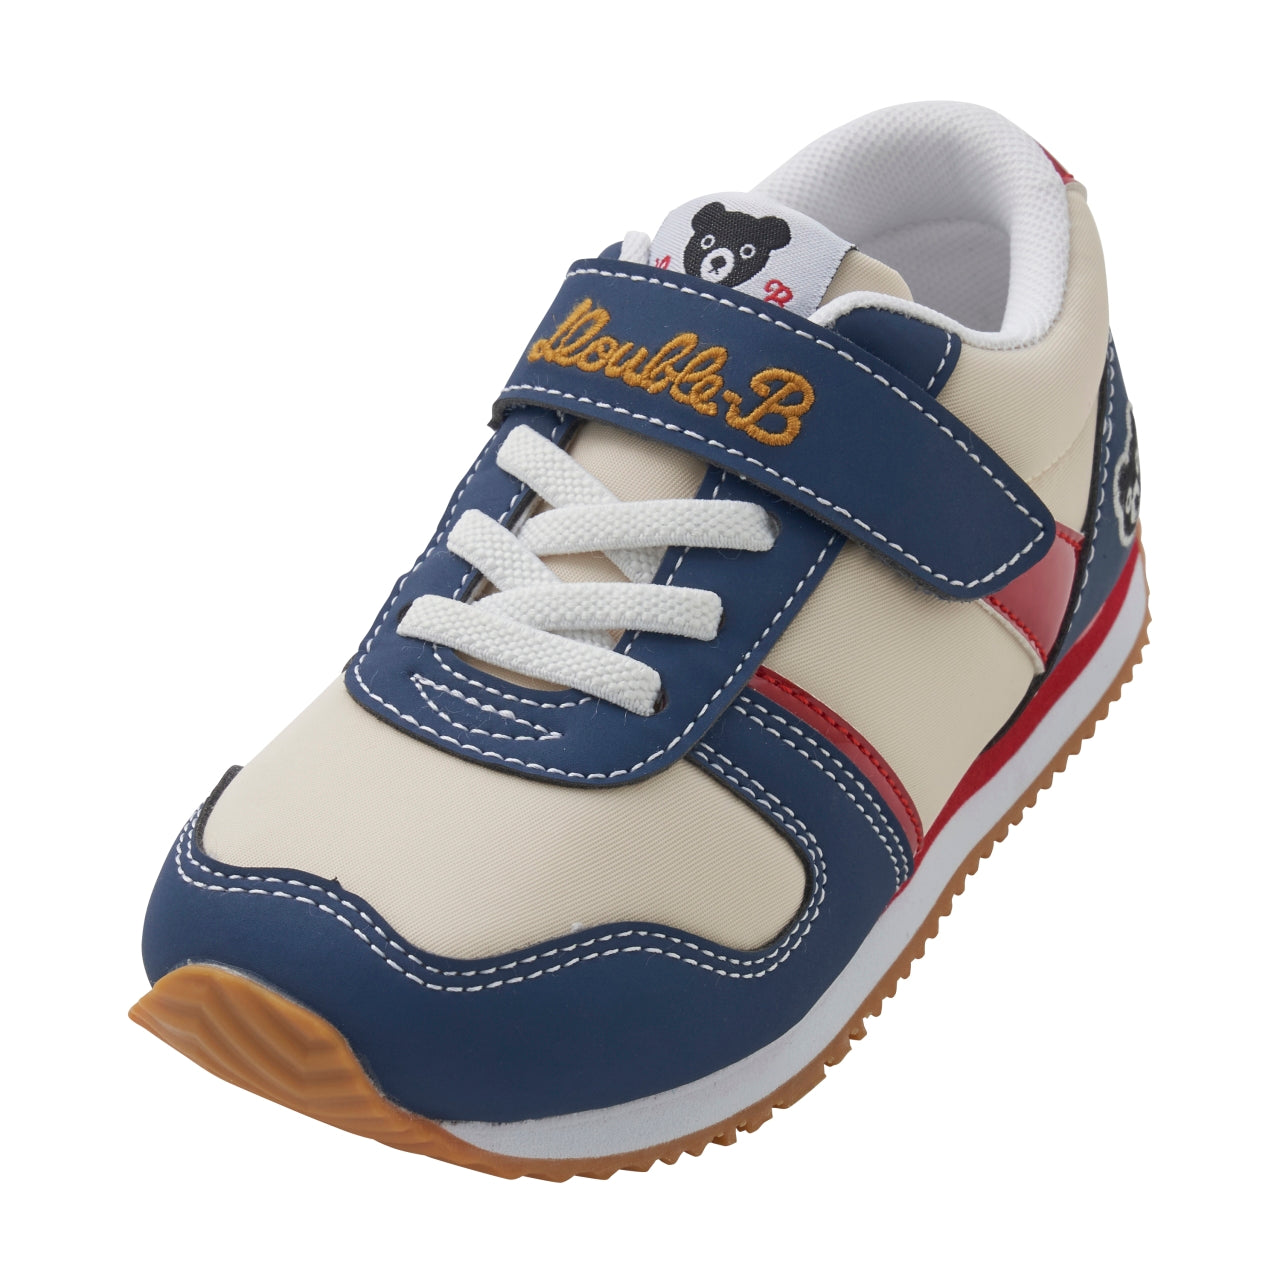 DOUBLE_B Retro Shoes for Kids